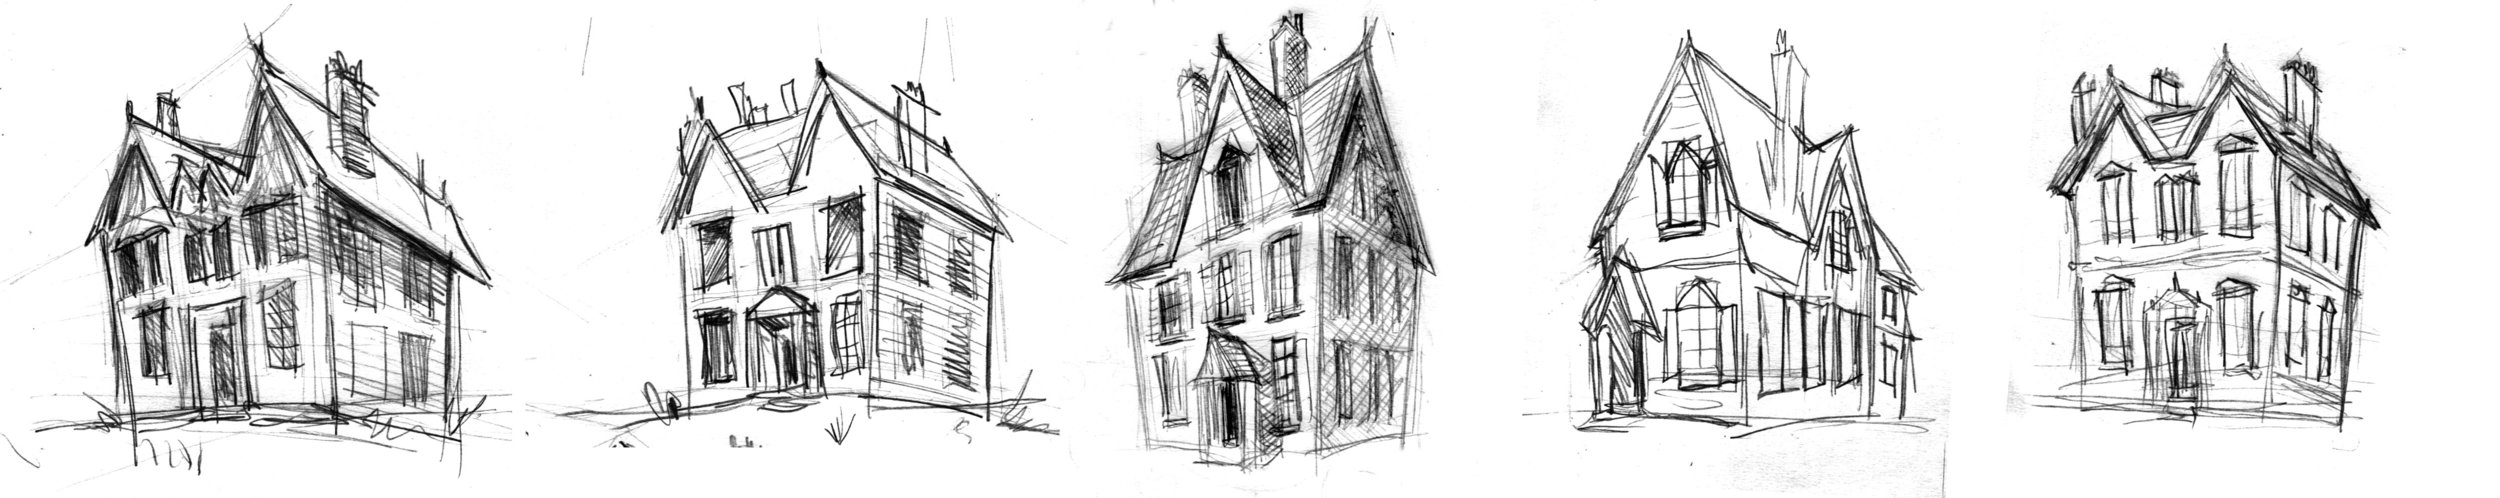 The Woman in Black Cover House Sketches | Design by Jamie Clarke Type